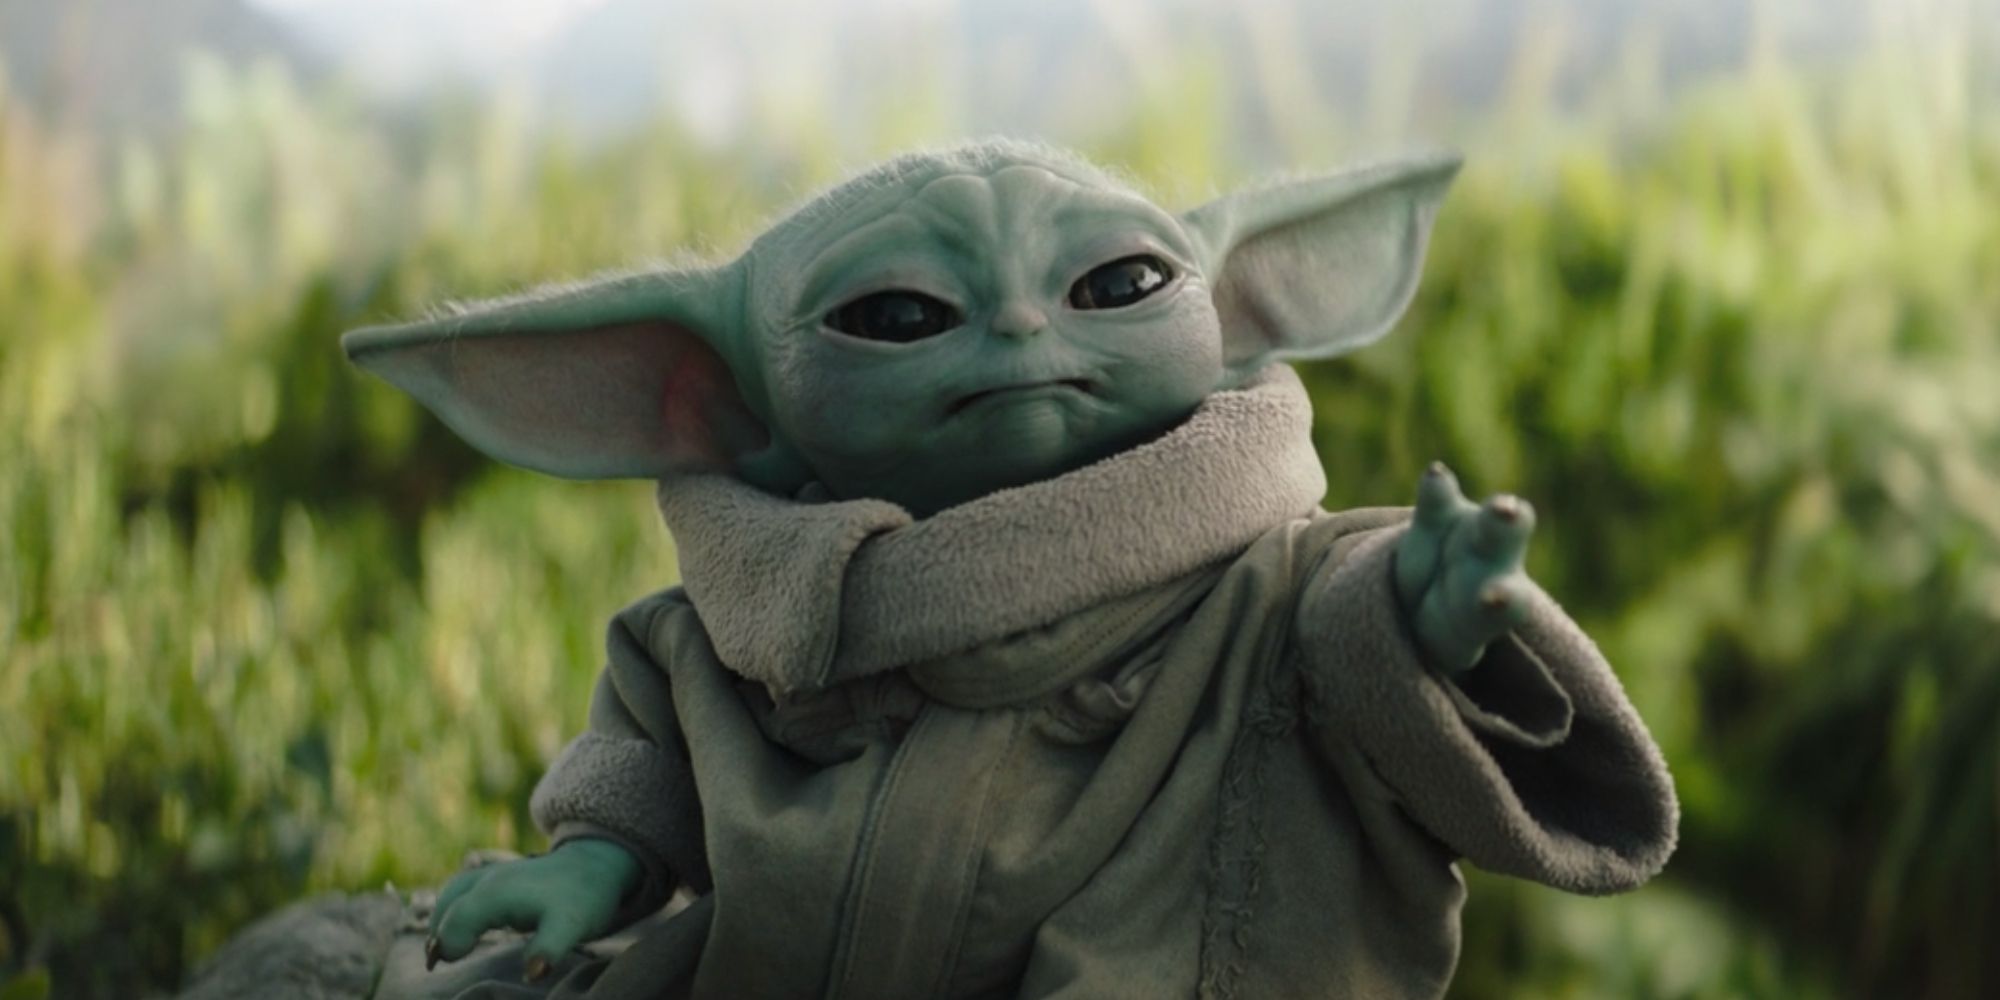 How Baby Yoda's Forgotten First Appearance Changed Star Wars Forever